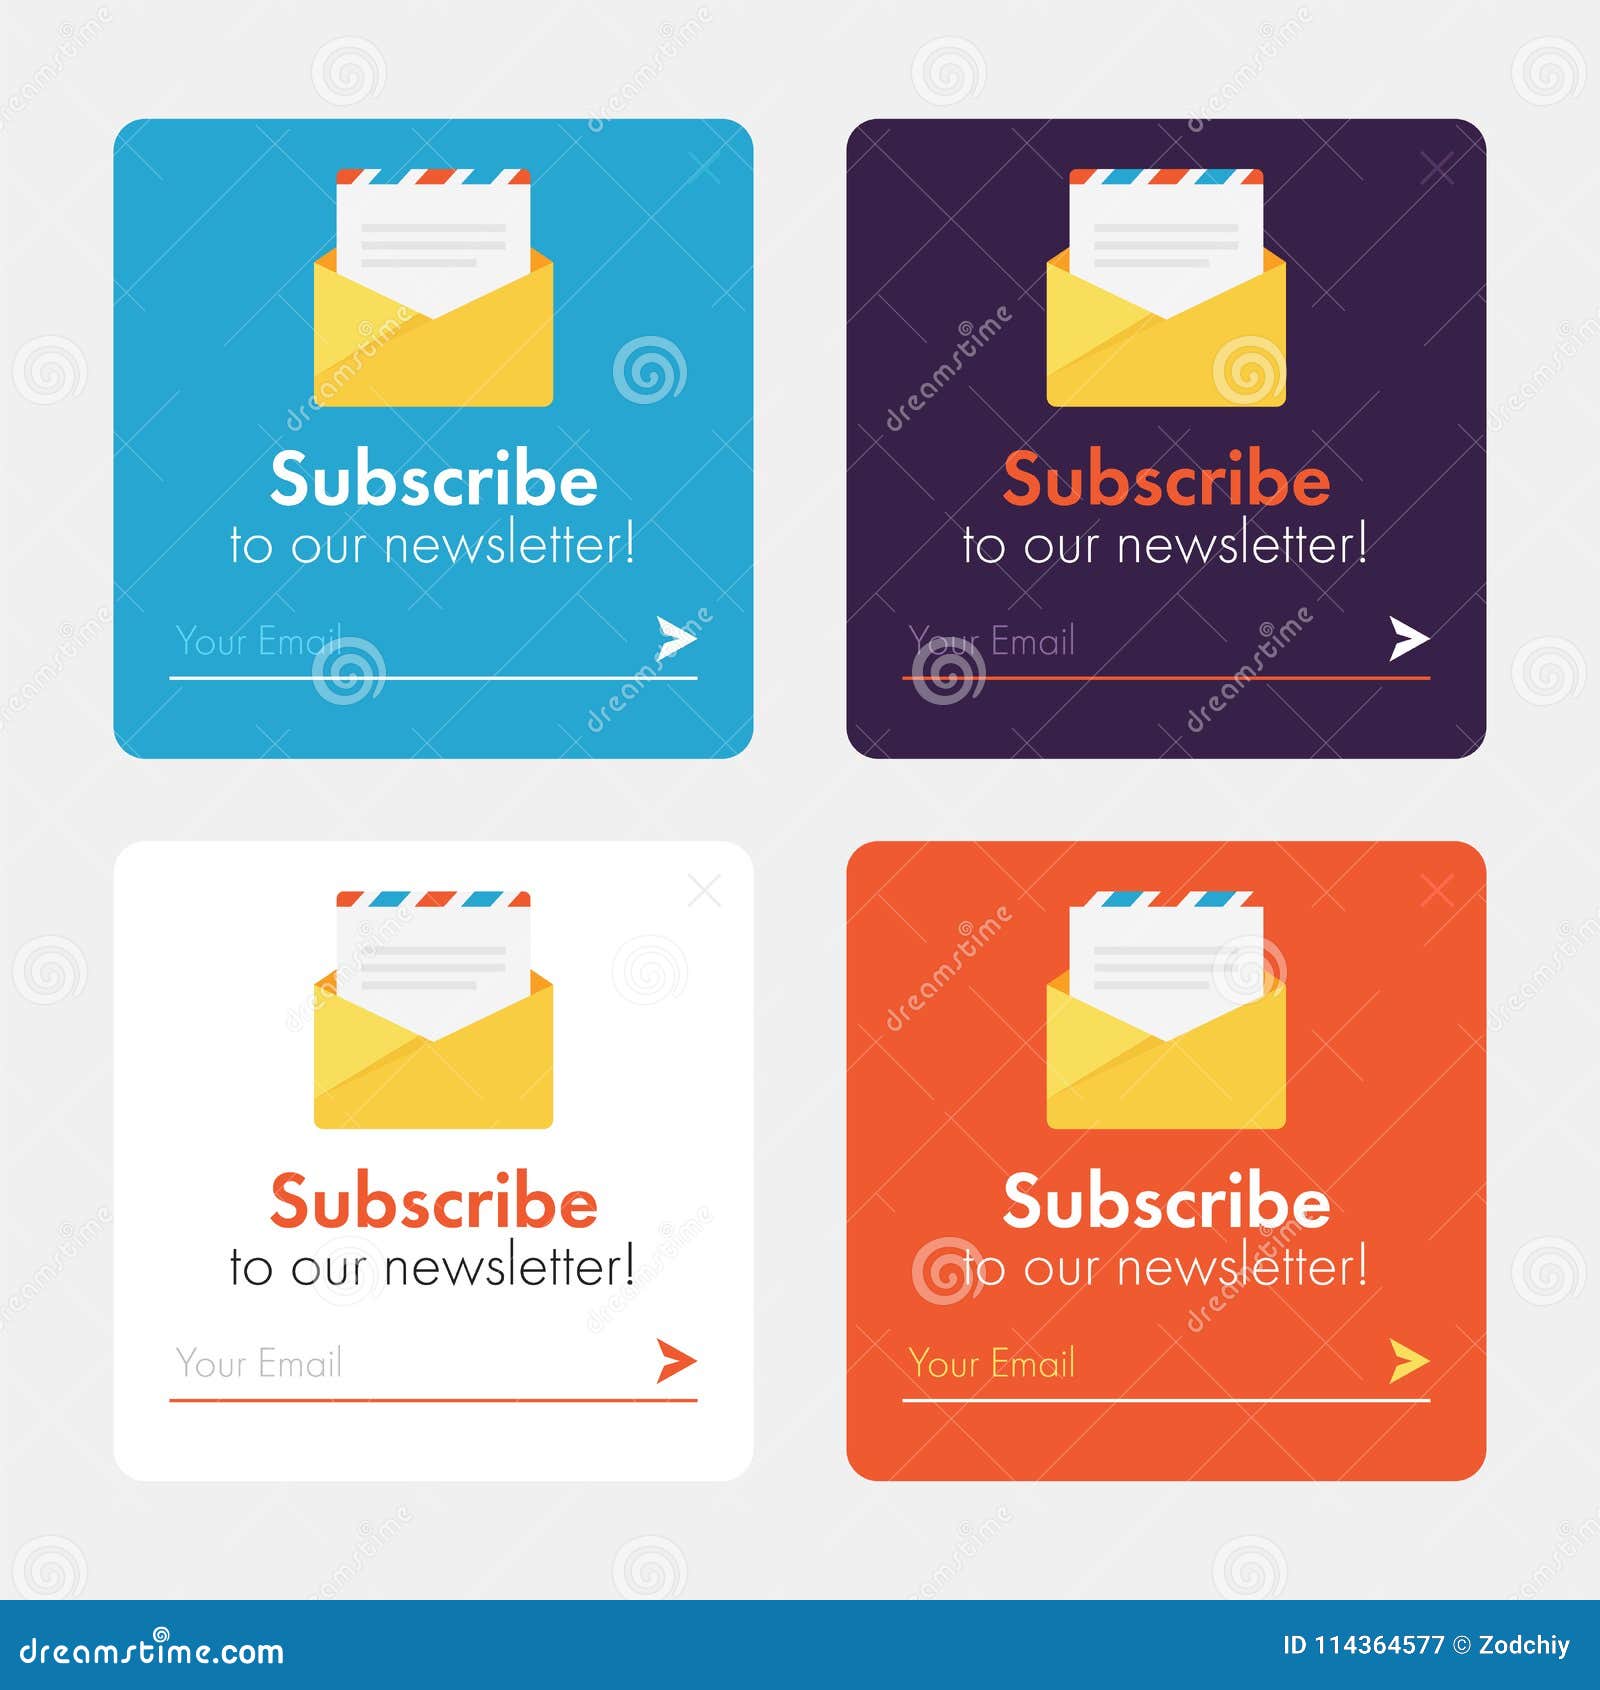 How To Get More Email Subscribers On Your WordPress Site